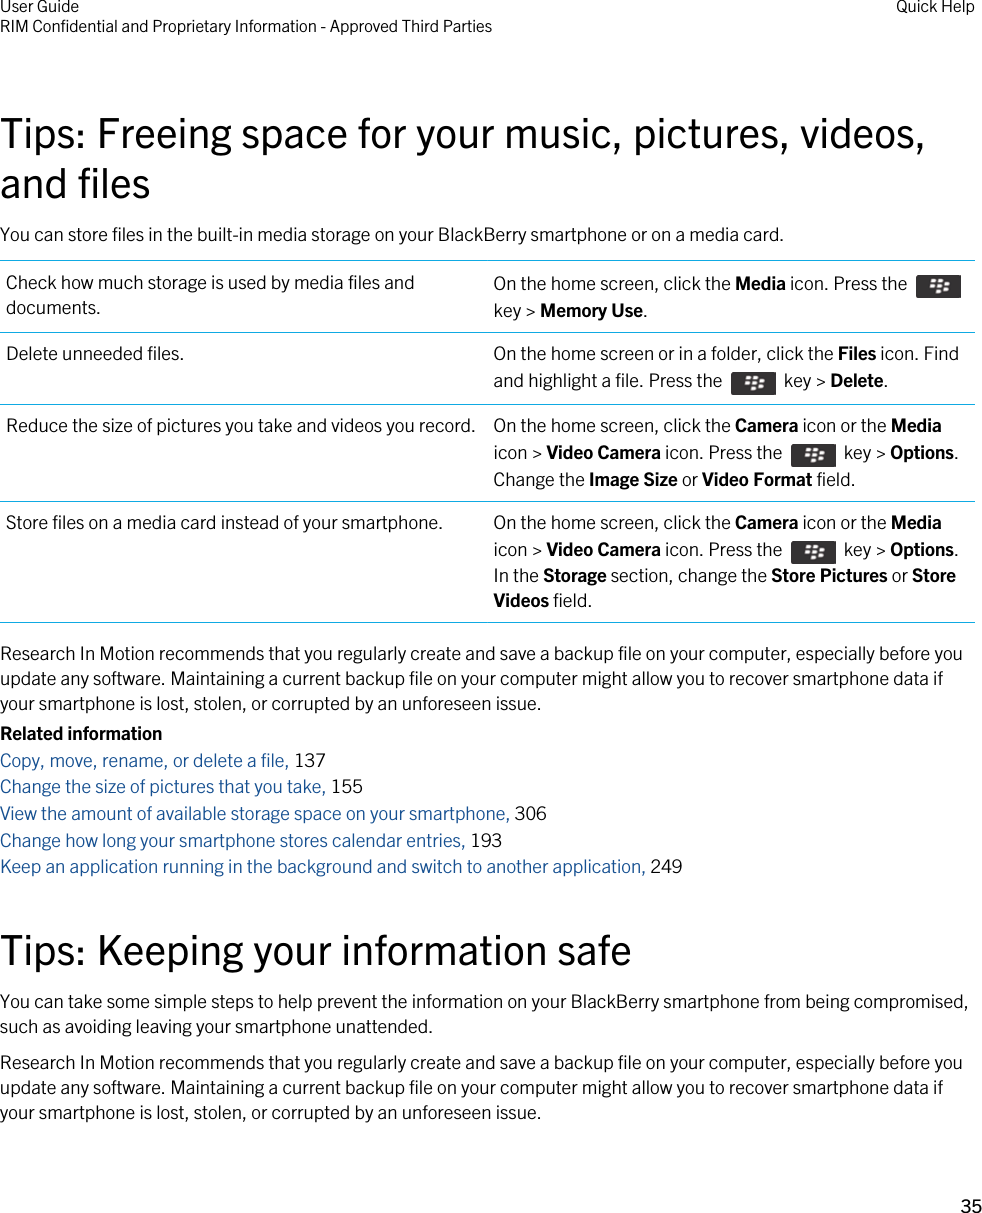 Tips: Freeing space for your music, pictures, videos, and filesYou can store files in the built-in media storage on your BlackBerry smartphone or on a media card.Check how much storage is used by media files and documents. On the home screen, click the Media icon. Press the key &gt; Memory Use.Delete unneeded files. On the home screen or in a folder, click the Files icon. Find and highlight a file. Press the    key &gt; Delete.Reduce the size of pictures you take and videos you record. On the home screen, click the Camera icon or the Media icon &gt; Video Camera icon. Press the    key &gt; Options. Change the Image Size or Video Format field.Store files on a media card instead of your smartphone. On the home screen, click the Camera icon or the Media icon &gt; Video Camera icon. Press the    key &gt; Options. In the Storage section, change the Store Pictures or Store Videos field.Research In Motion recommends that you regularly create and save a backup file on your computer, especially before you update any software. Maintaining a current backup file on your computer might allow you to recover smartphone data if your smartphone is lost, stolen, or corrupted by an unforeseen issue.Related informationCopy, move, rename, or delete a file, 137Change the size of pictures that you take, 155View the amount of available storage space on your smartphone, 306Change how long your smartphone stores calendar entries, 193Keep an application running in the background and switch to another application, 249Tips: Keeping your information safeYou can take some simple steps to help prevent the information on your BlackBerry smartphone from being compromised, such as avoiding leaving your smartphone unattended.Research In Motion recommends that you regularly create and save a backup file on your computer, especially before you update any software. Maintaining a current backup file on your computer might allow you to recover smartphone data if your smartphone is lost, stolen, or corrupted by an unforeseen issue.User GuideRIM Confidential and Proprietary Information - Approved Third Parties Quick Help35 